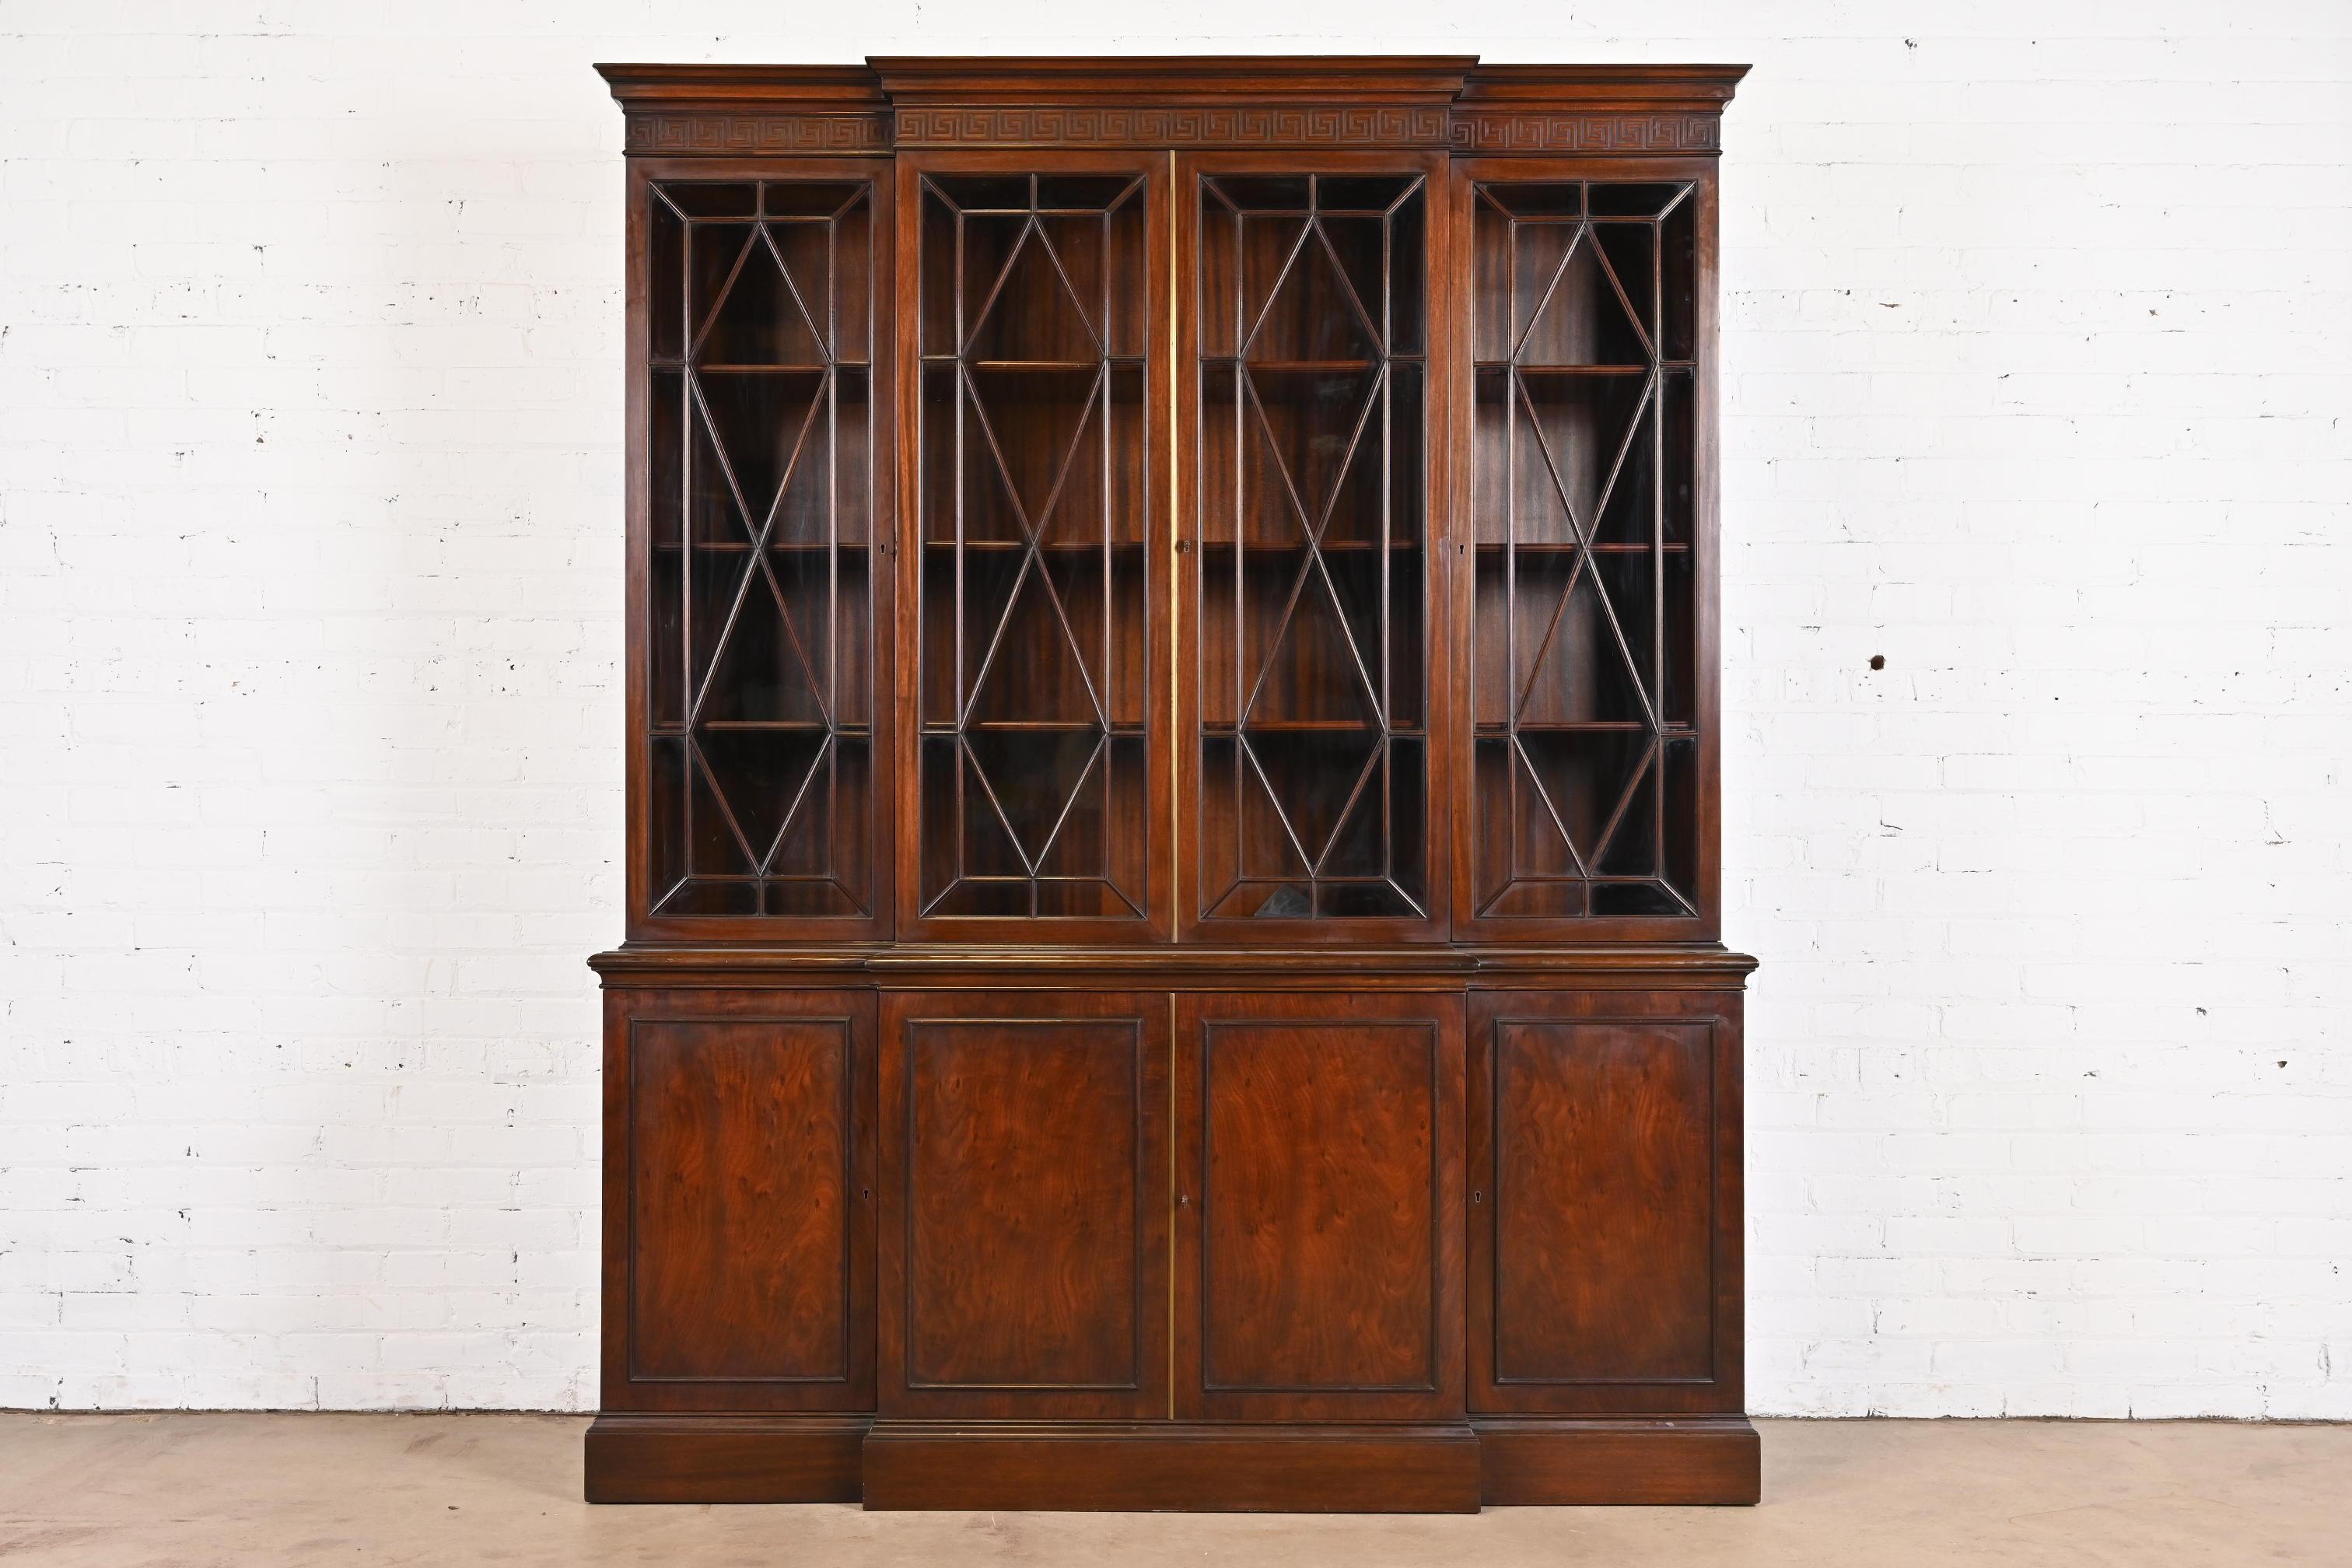 A gorgeous Georgian or Chippendale style breakfront bookcase or dining cabinet 

By Schmieg & Kotzian

USA, Circa 1940s

Mahogany, with carved Greek key design, mullioned glass front doors, and brass hardware. Cabinet locks, and key is